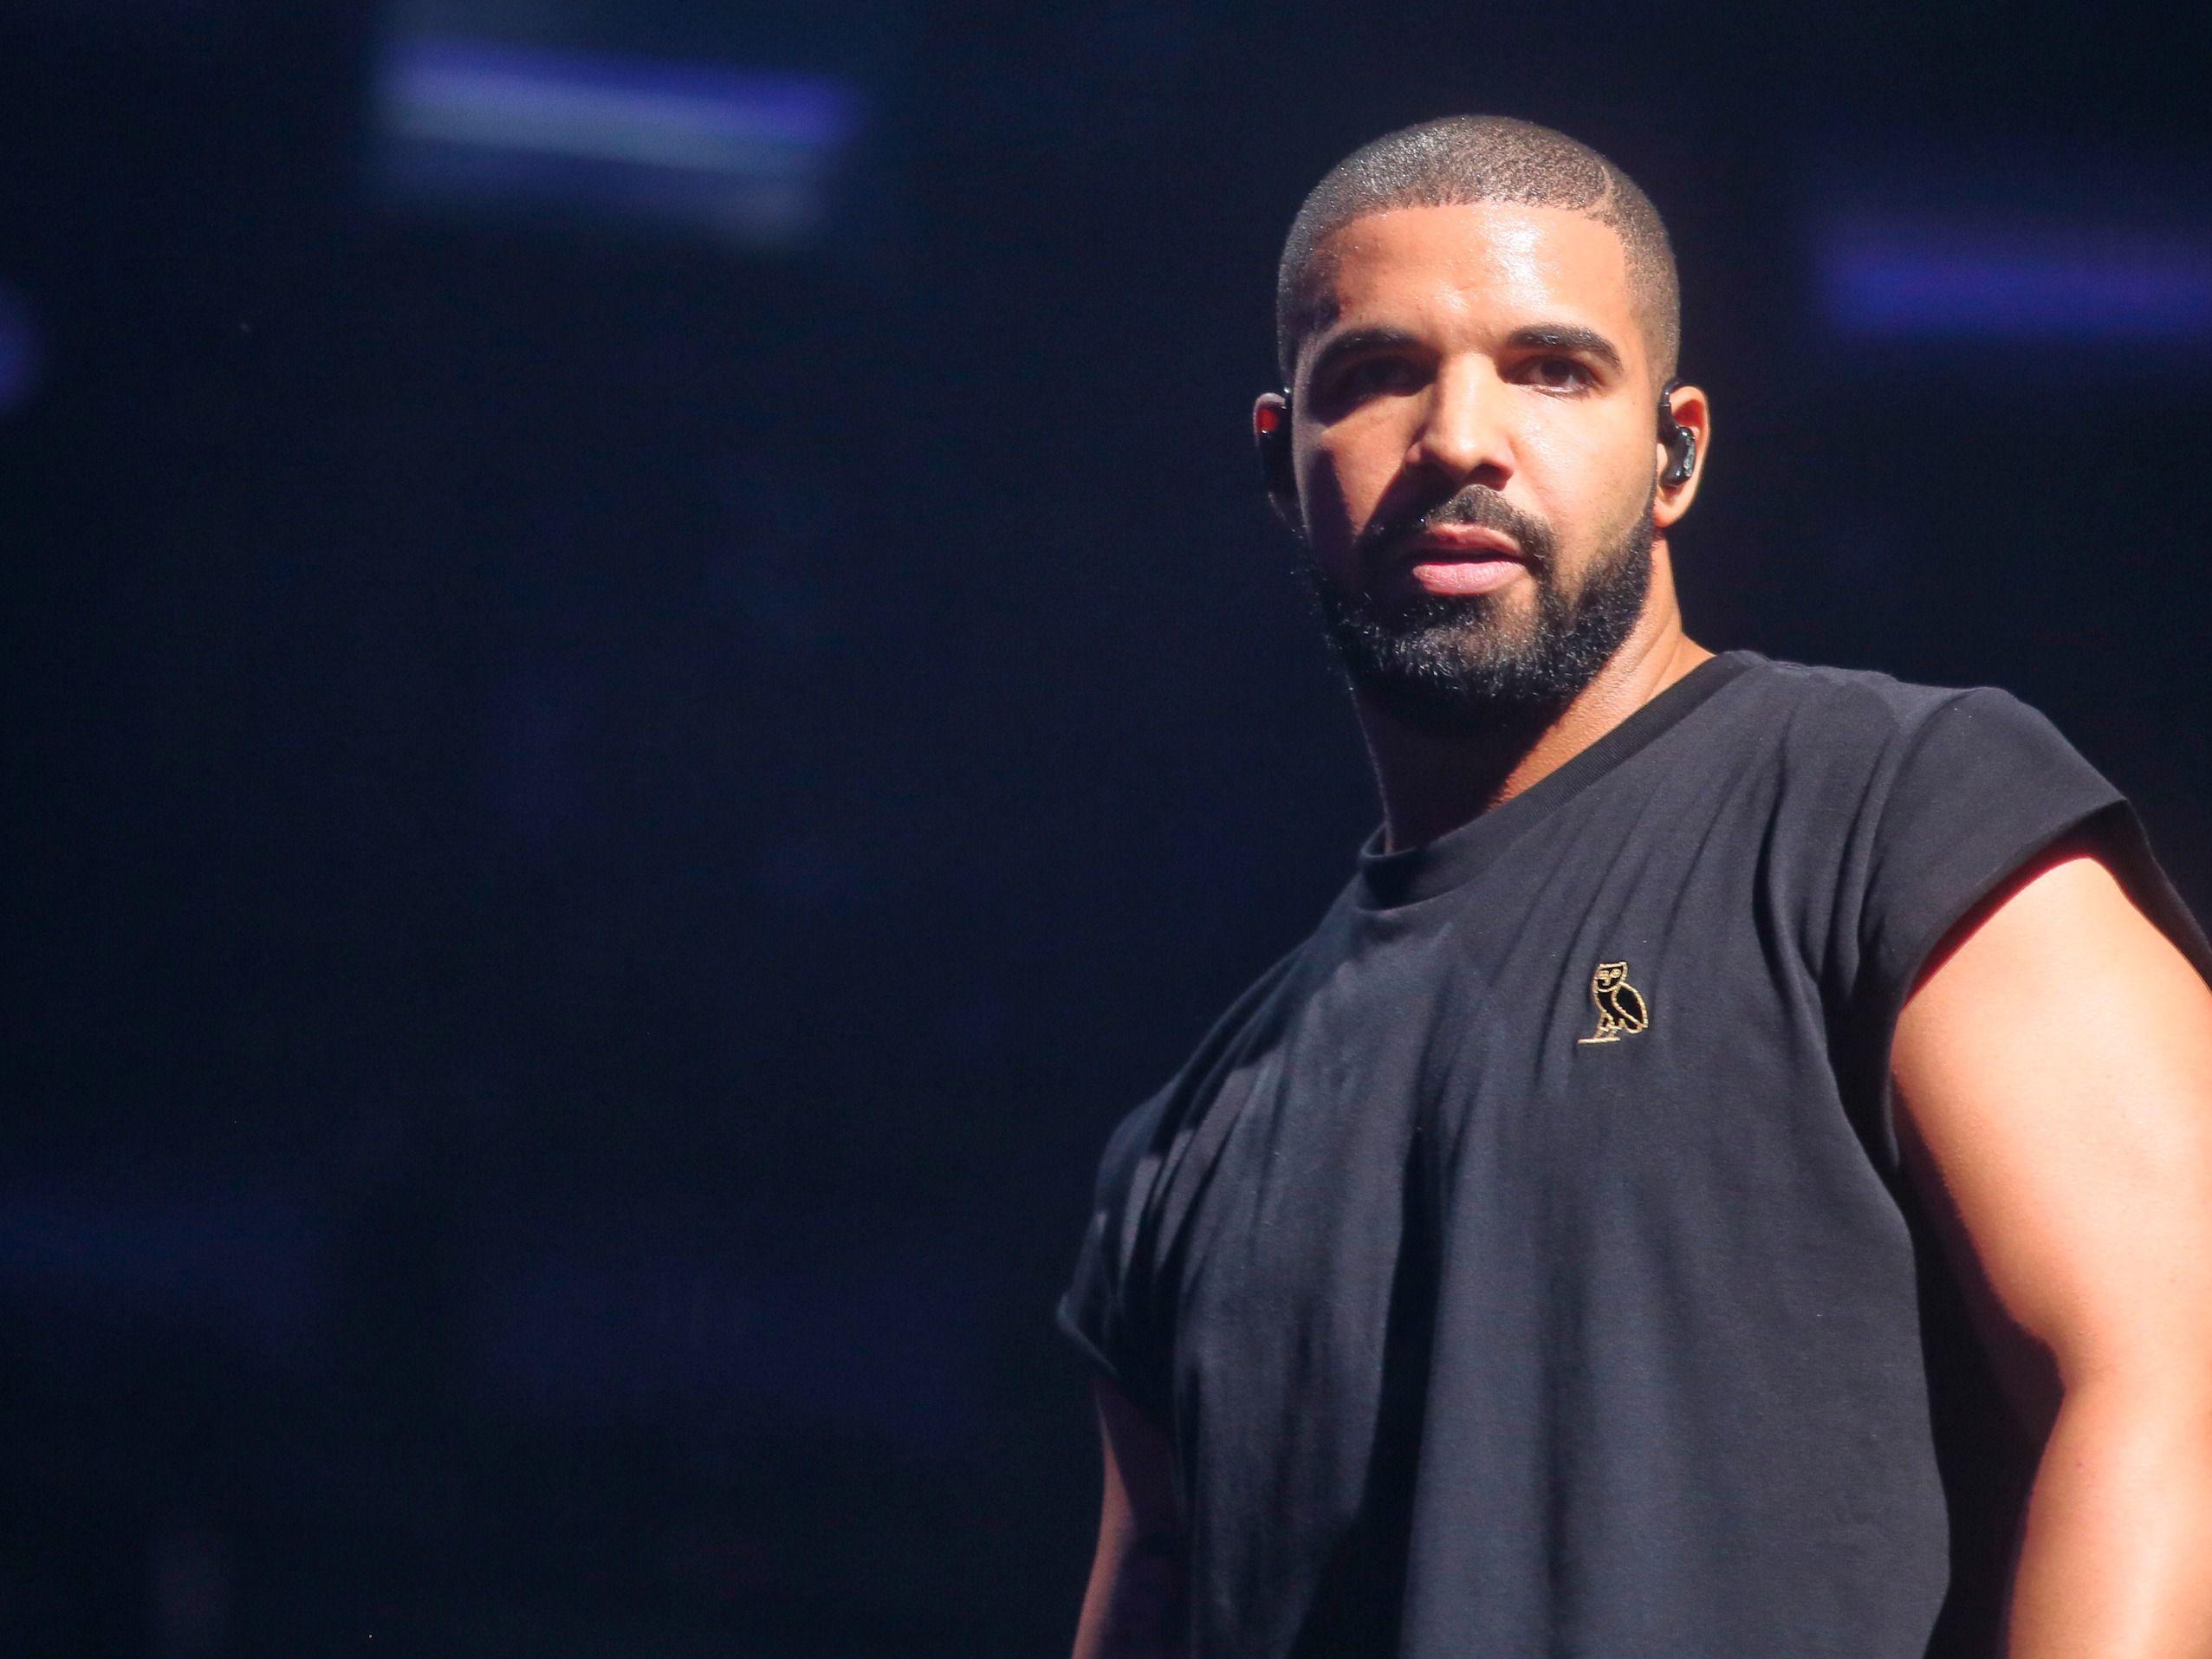 An emerging artist claims Drake 'jacked' the biggest hit of his